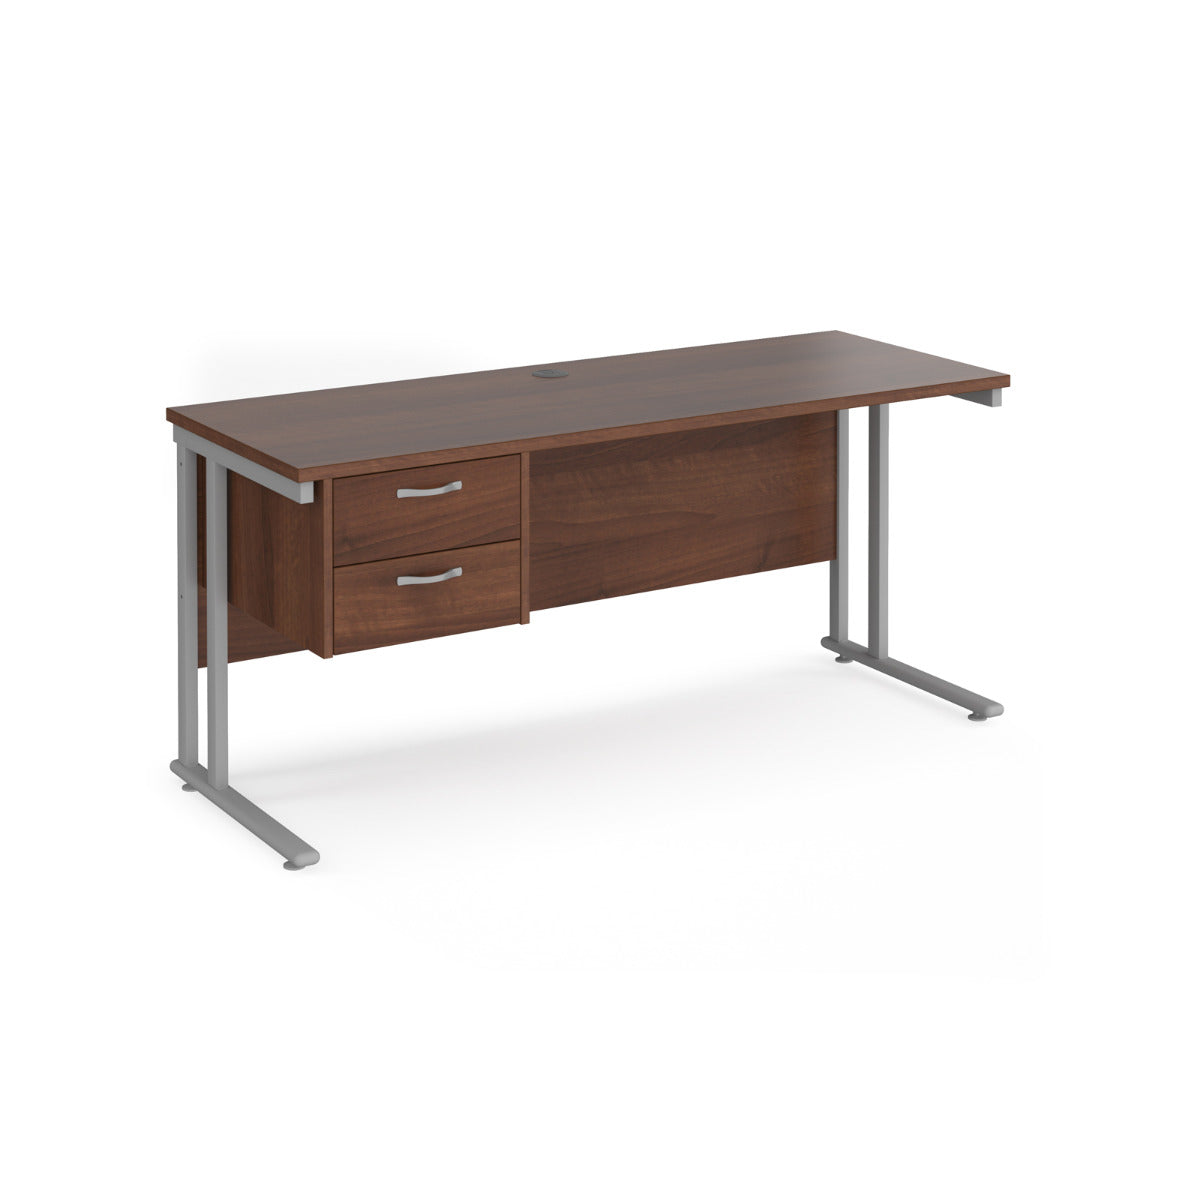 Maestro 600mm Deep Straight Cantilever Leg Office Desk with Two Drawer Pedestal